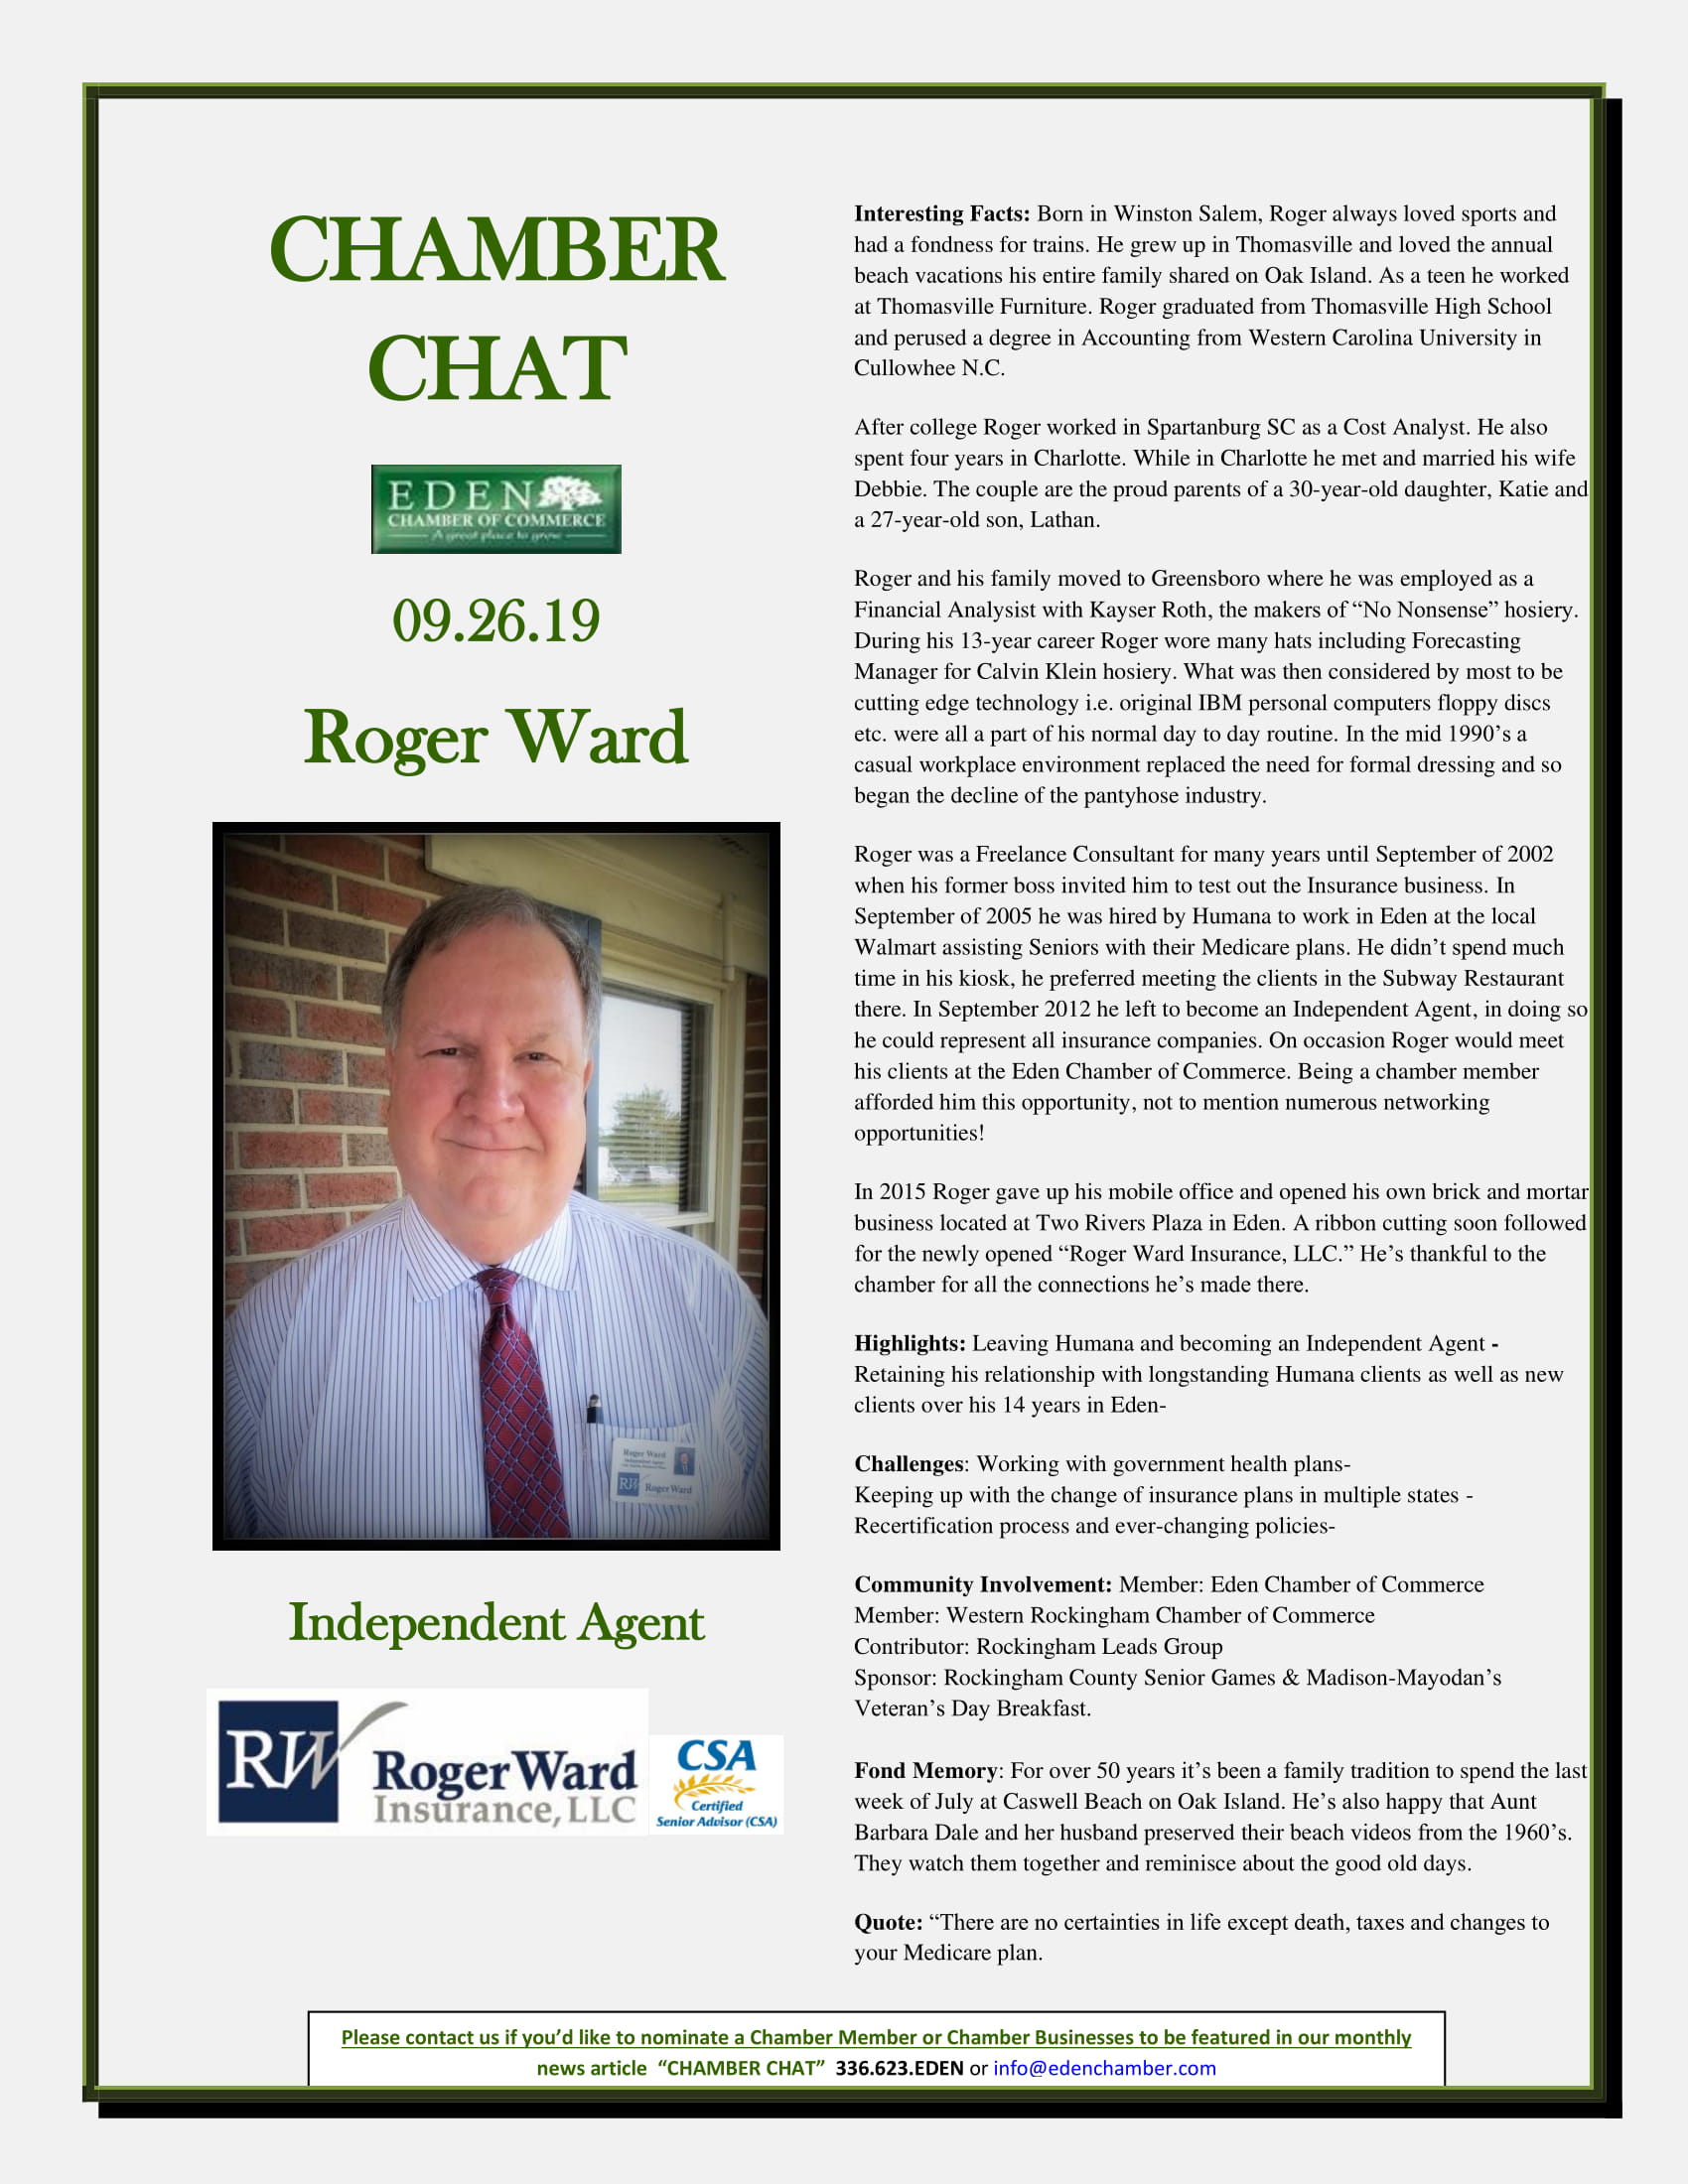 CHAMBER-CHAT-Roger-Ward--Independent-Insurance-Agent-9.26.19-1